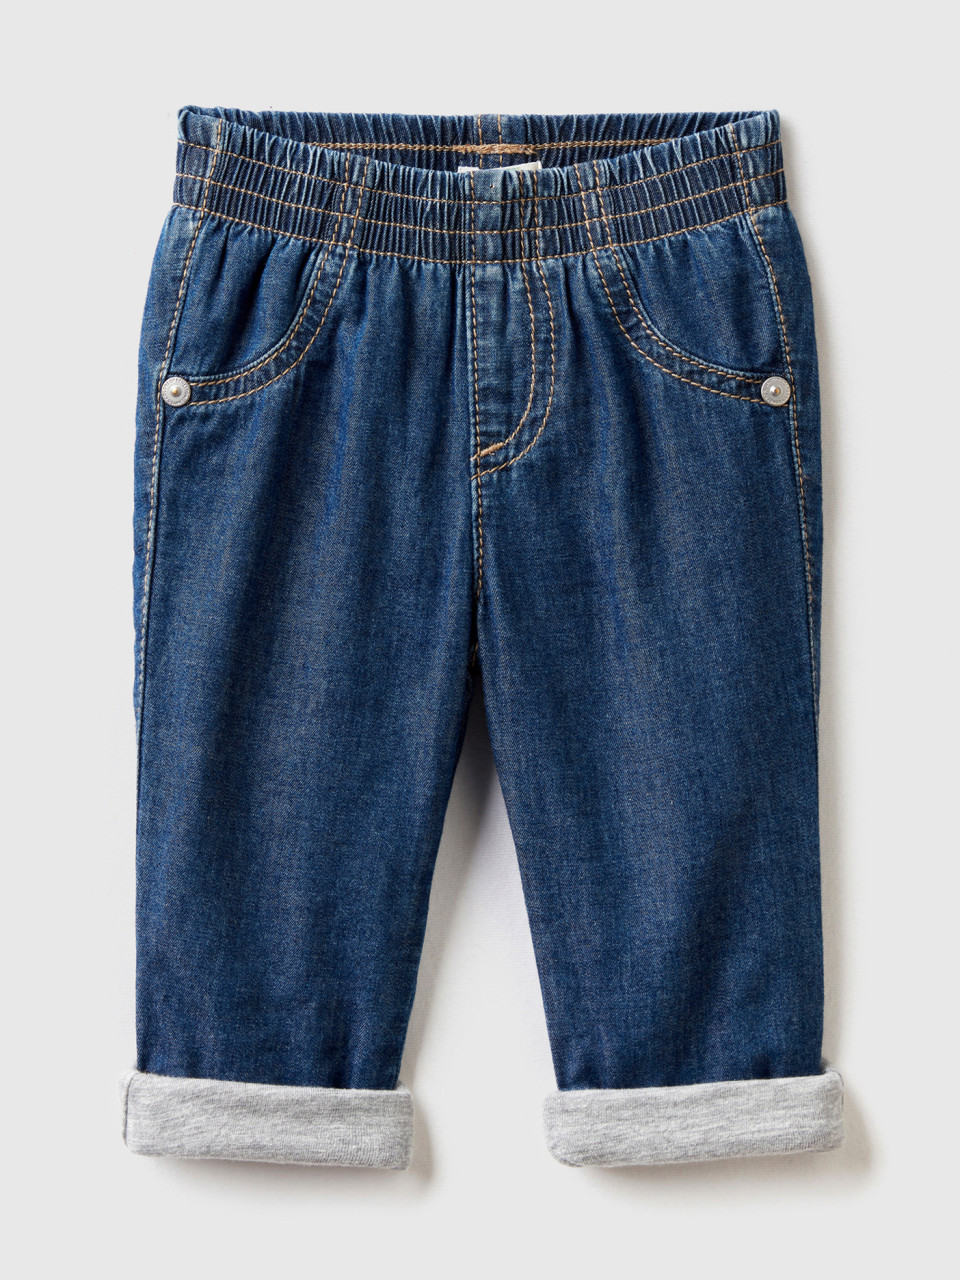 Benetton, Trousers Lined In Pure Cotton, Blue, Kids